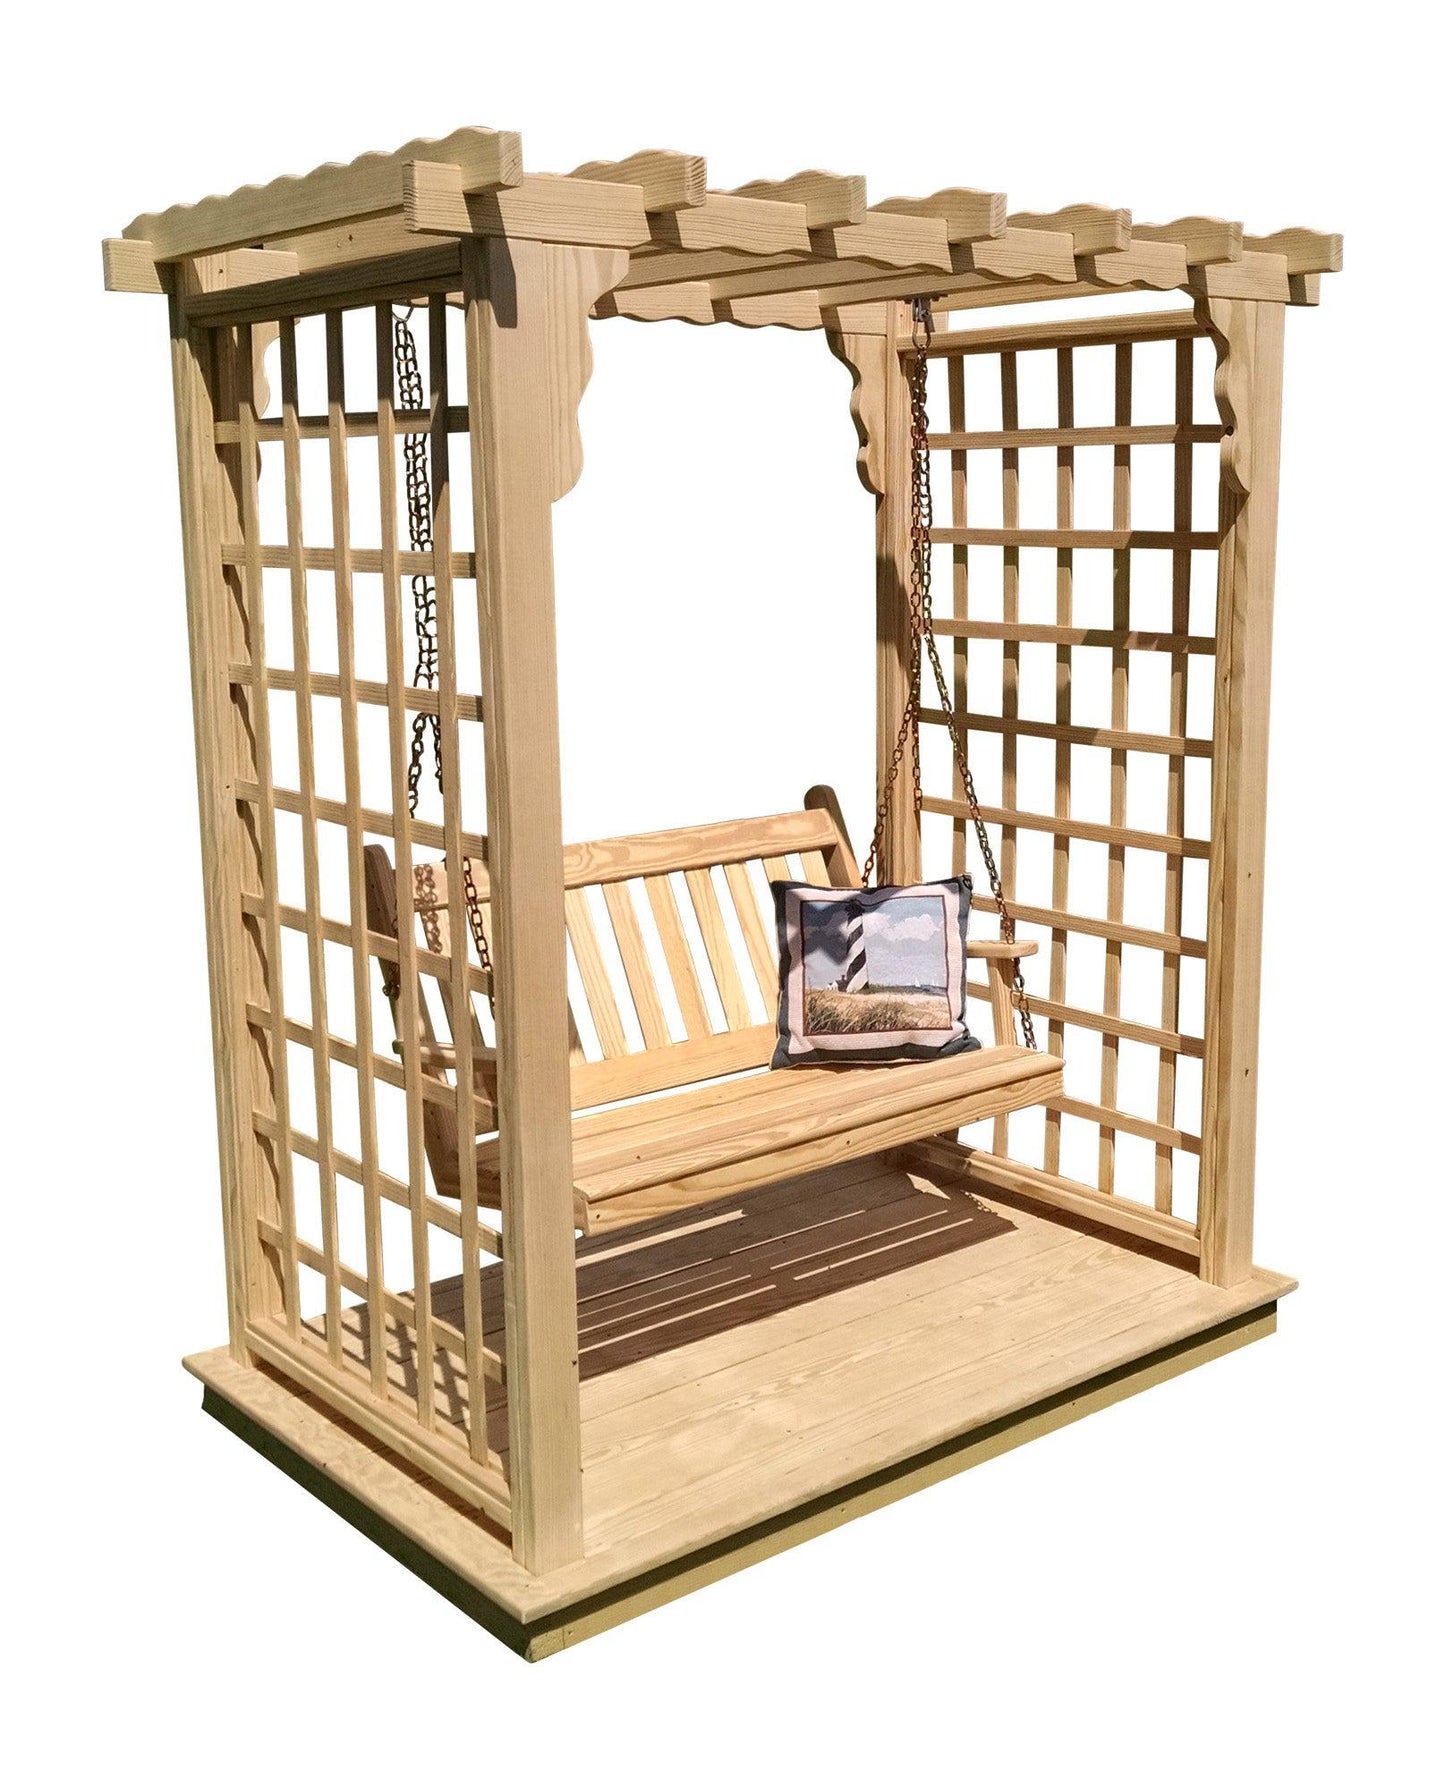 A&L FURNITURE CO. 5' Lexington Pressure Treated Pine Arbor w/ Deck & Swing - LEAD TIME TO SHIP 10 BUSINESS DAYS